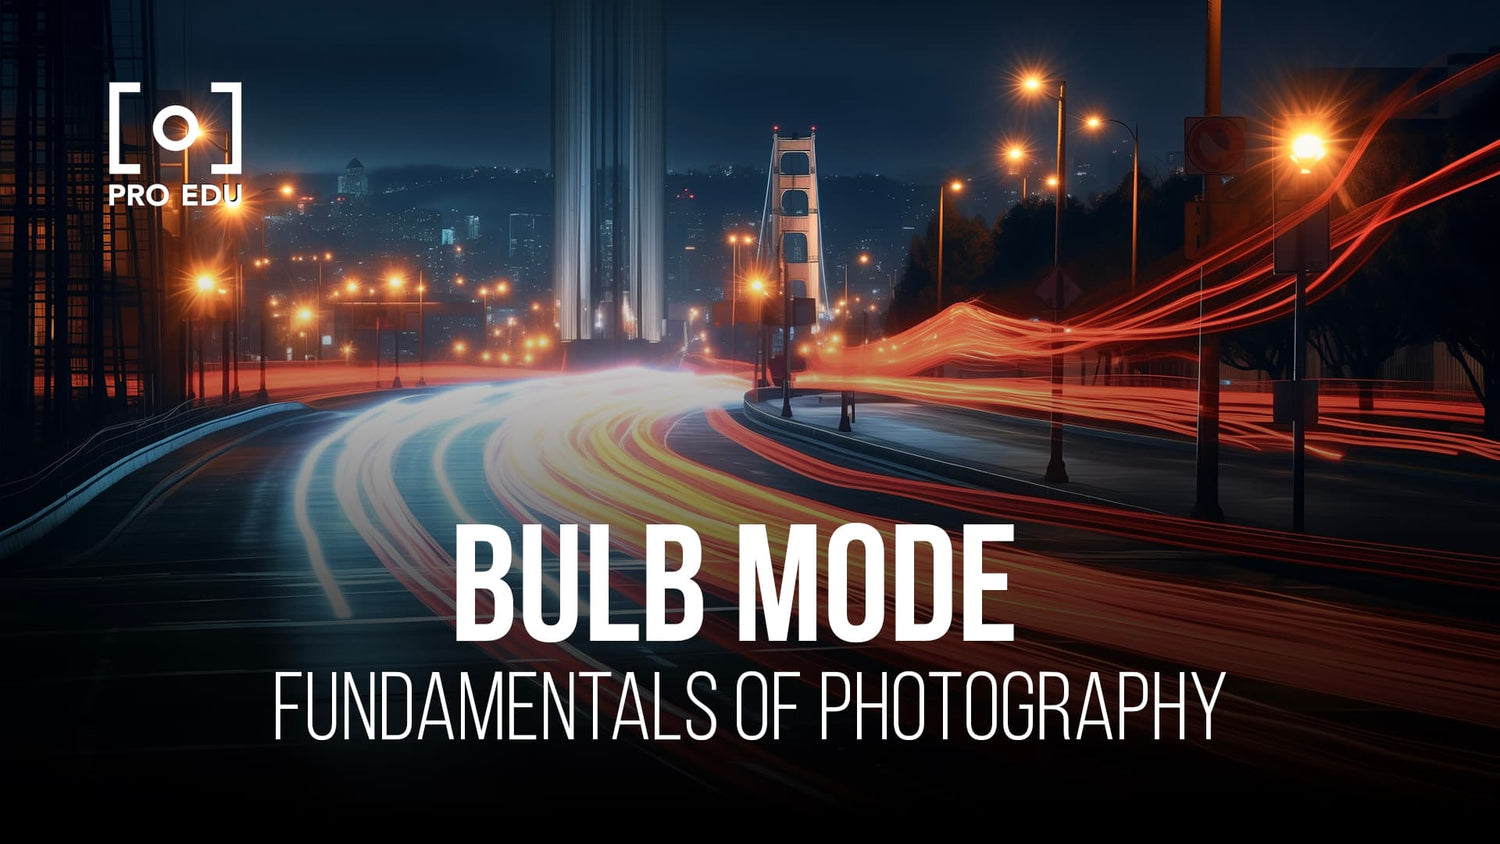 Simplifying long exposures in photography with bulb mode, a step-by-step approach